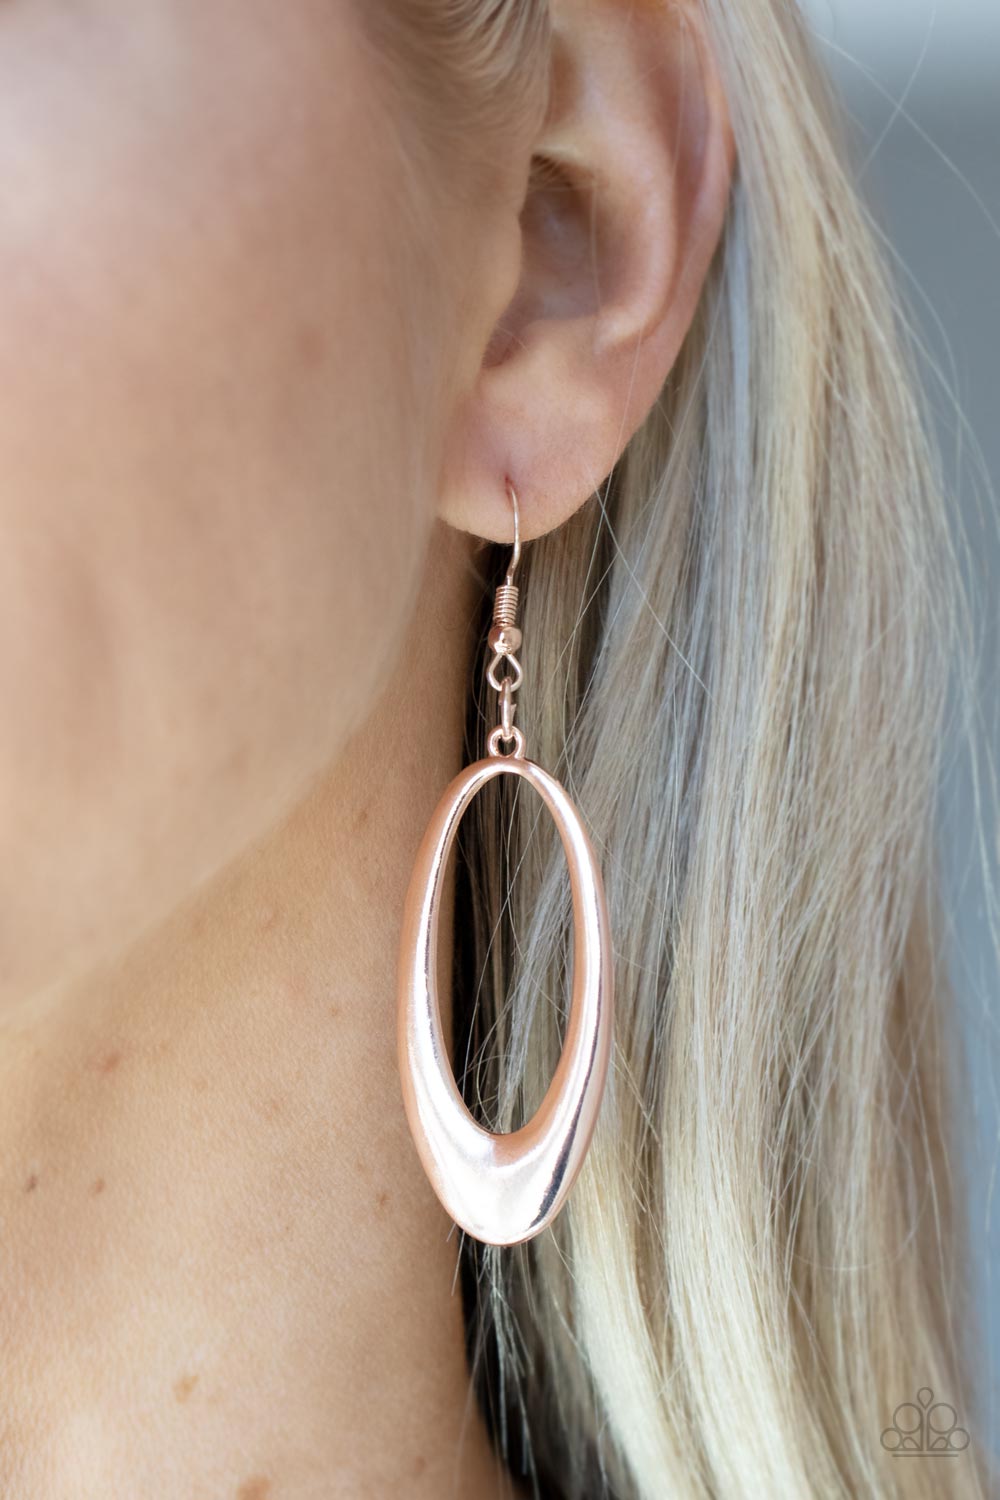 Paparazzi Earrings - Over the Hill - Rose Gold